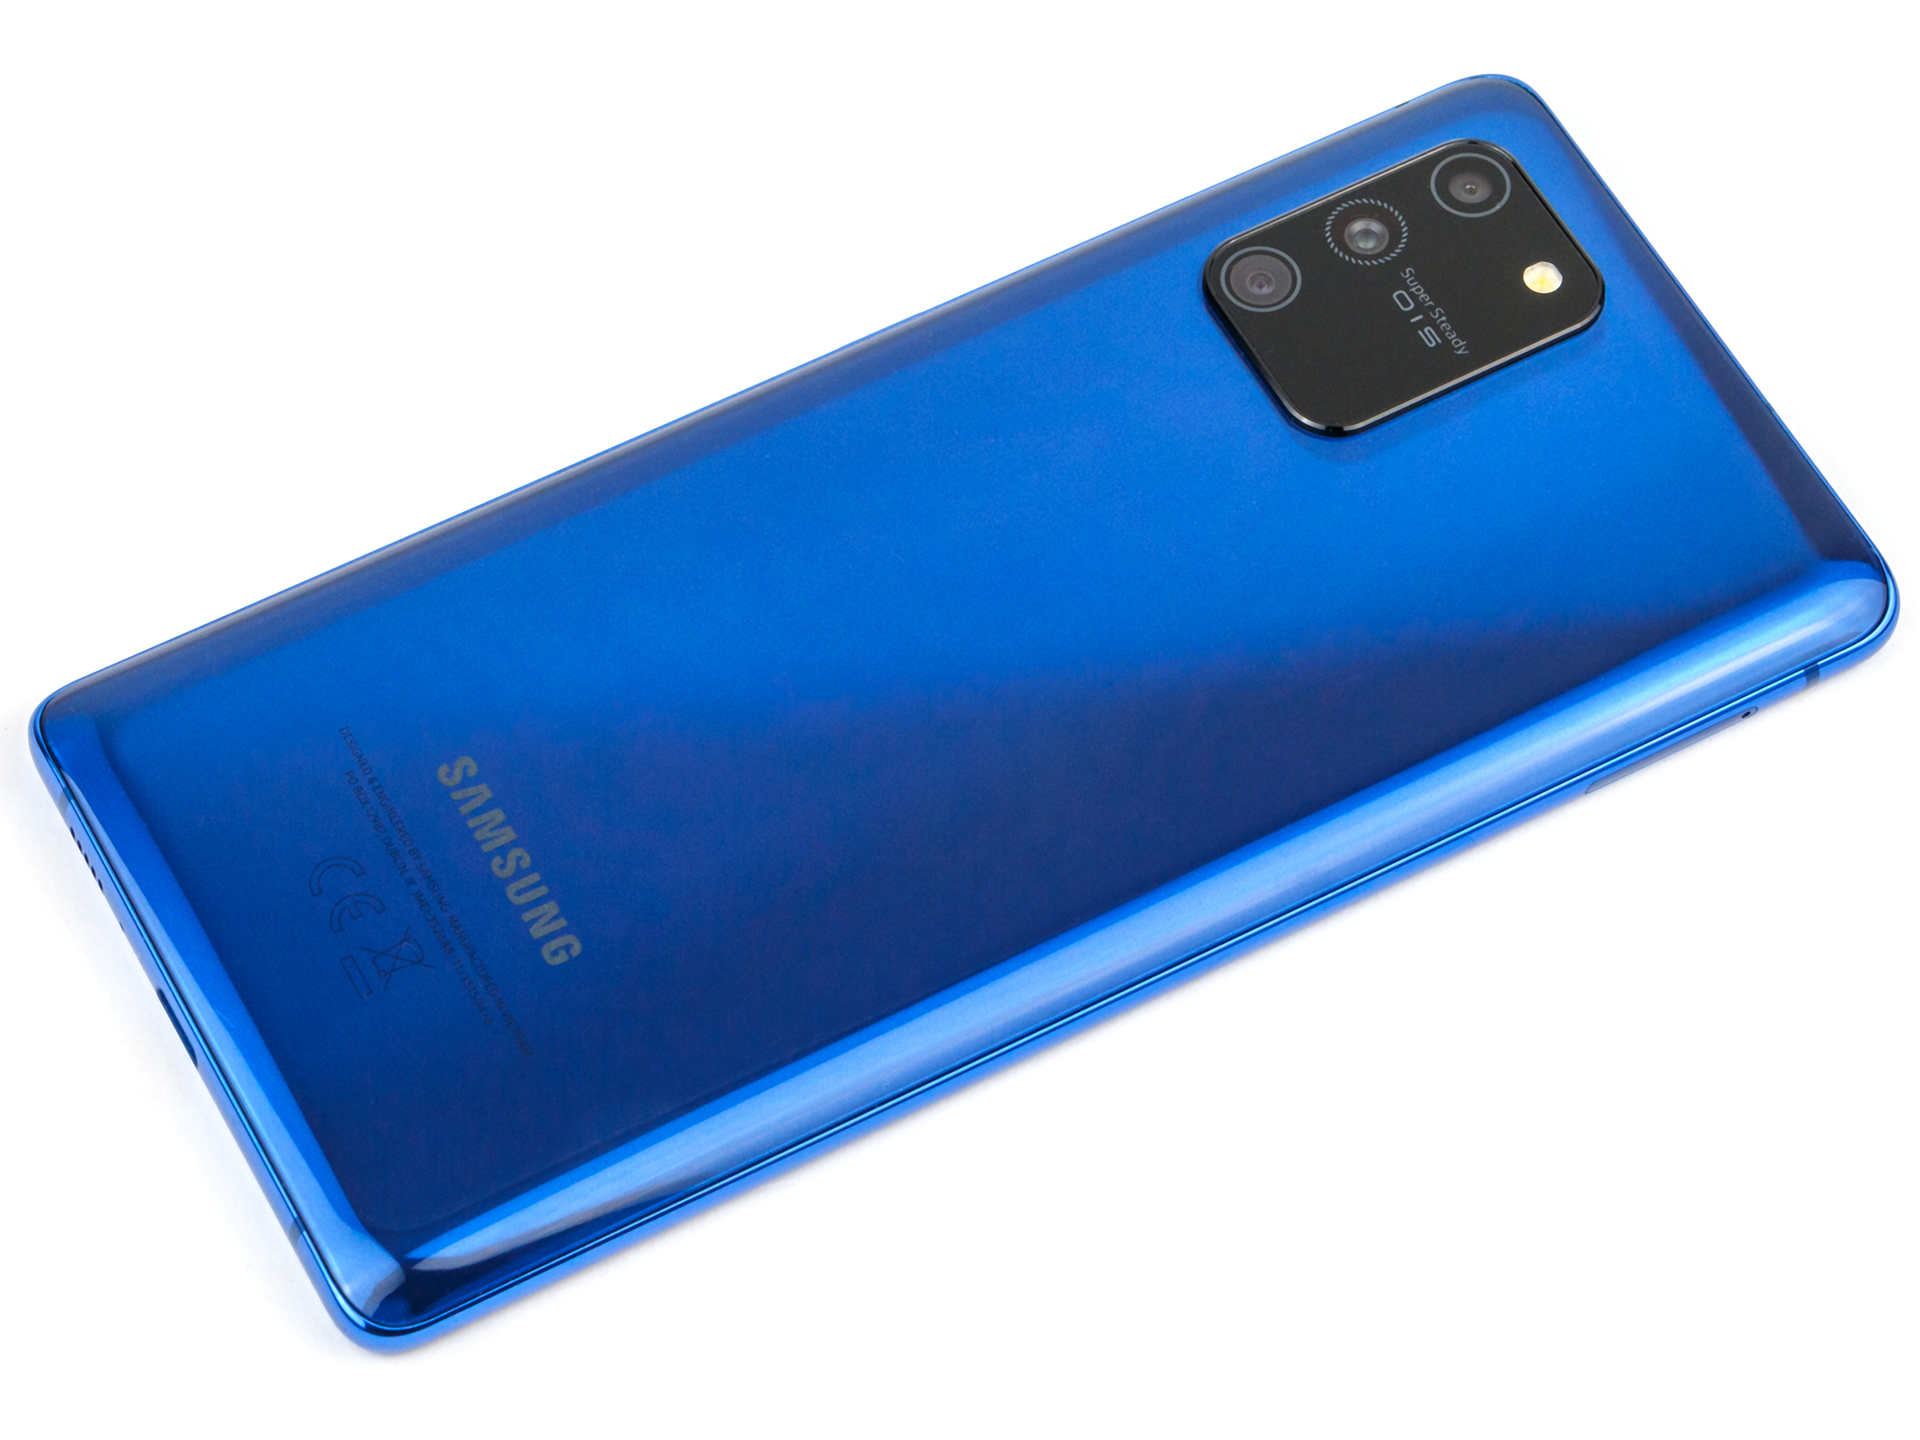 Samsung Galaxy S10 Lite's User Manual Gets Leaked 